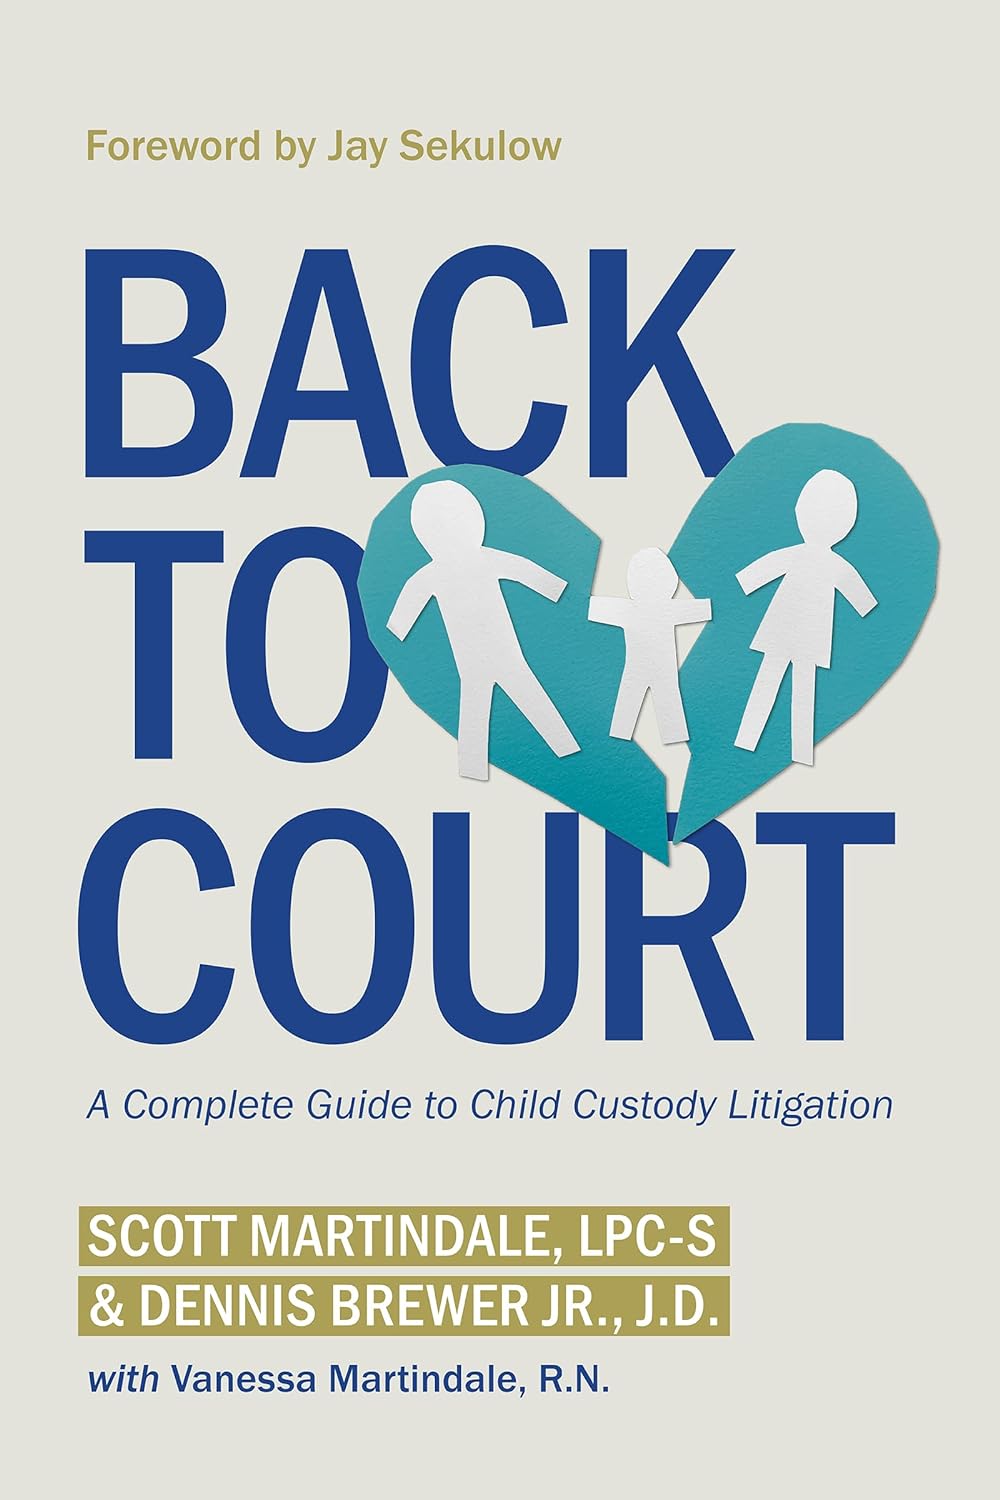 Back to Court - A Complete Guide to Child Custody Litigation - SureShot Books Publishing LLC